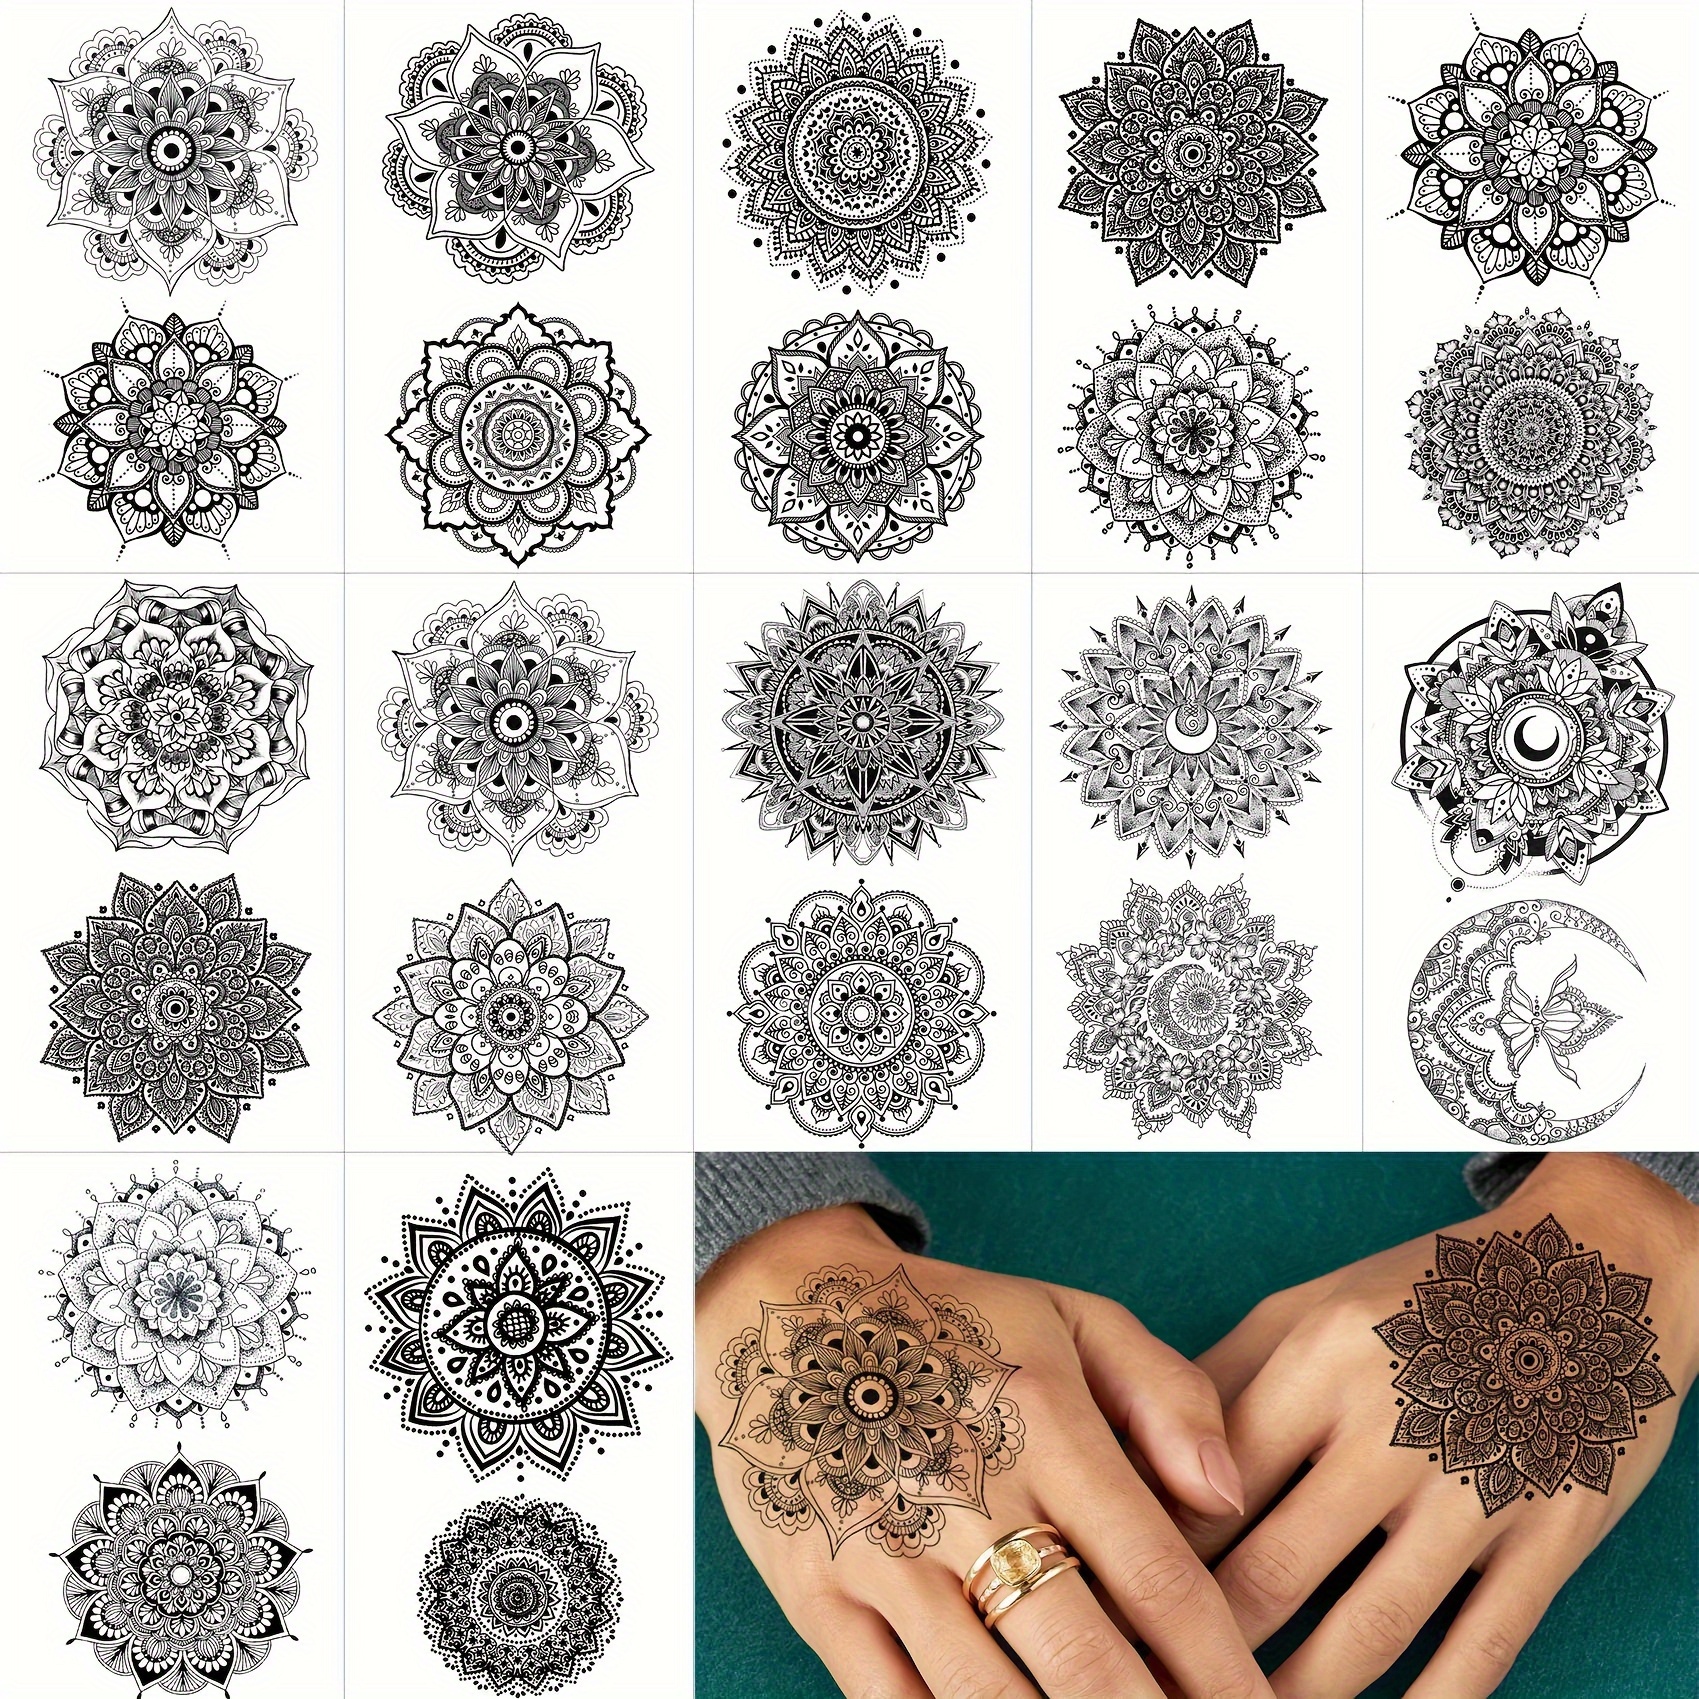 

12-piece Vintage Tribal Mandala Flower Temporary Tattoos - Waterproof & Long-lasting Fake Tattoo Stickers For Women, Girls, And Adults - Perfect For Arms, Hands, Neck, And More